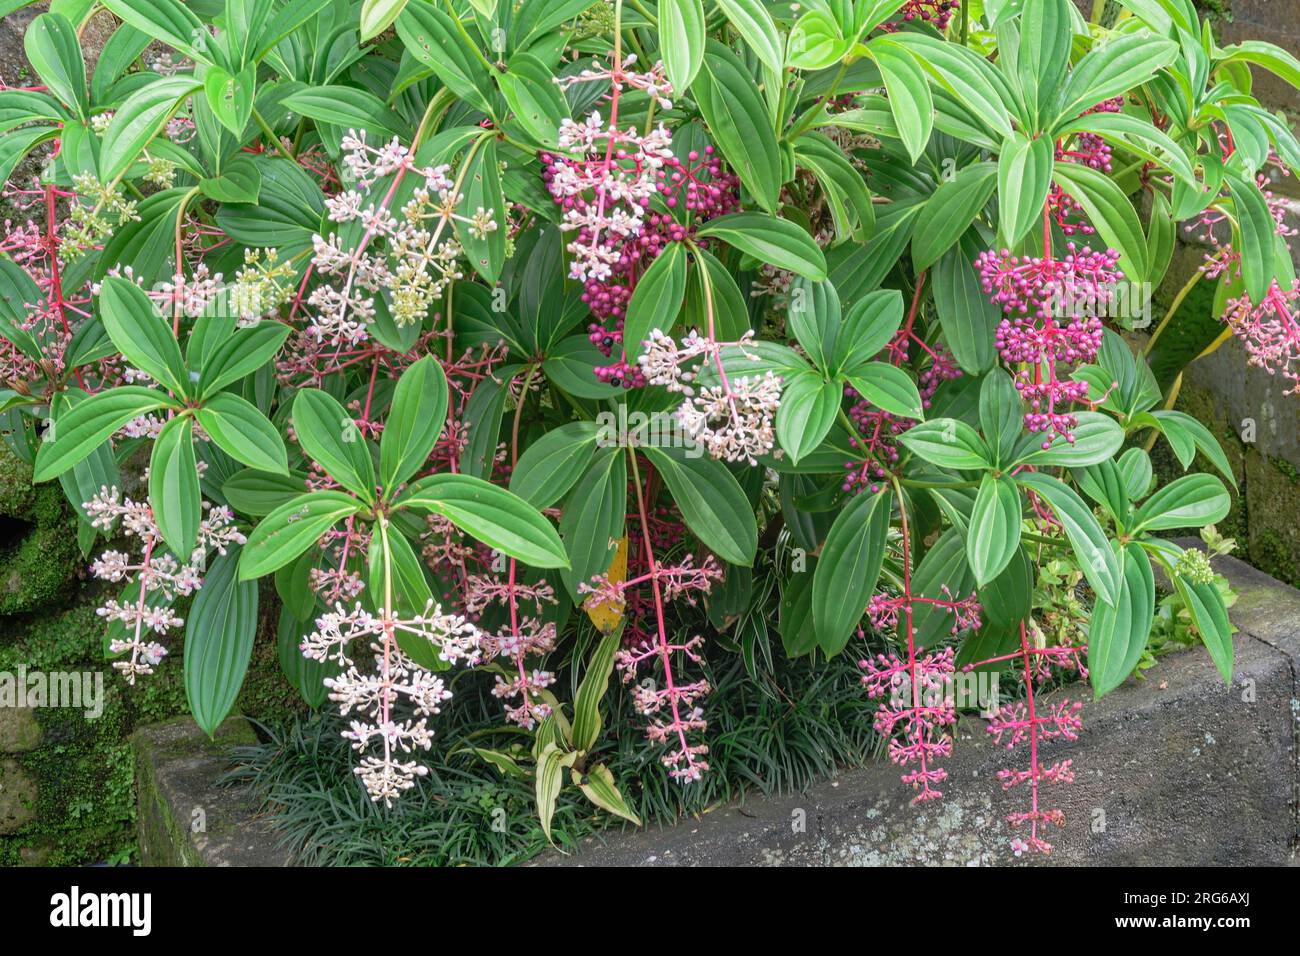 Magnificent Medinilla, Medinilla magnifica. The flowers grow in panicles up to 50 cm long, with ovid pink bracts. Penglipuran Village, Bangli Regency, Stock Photo